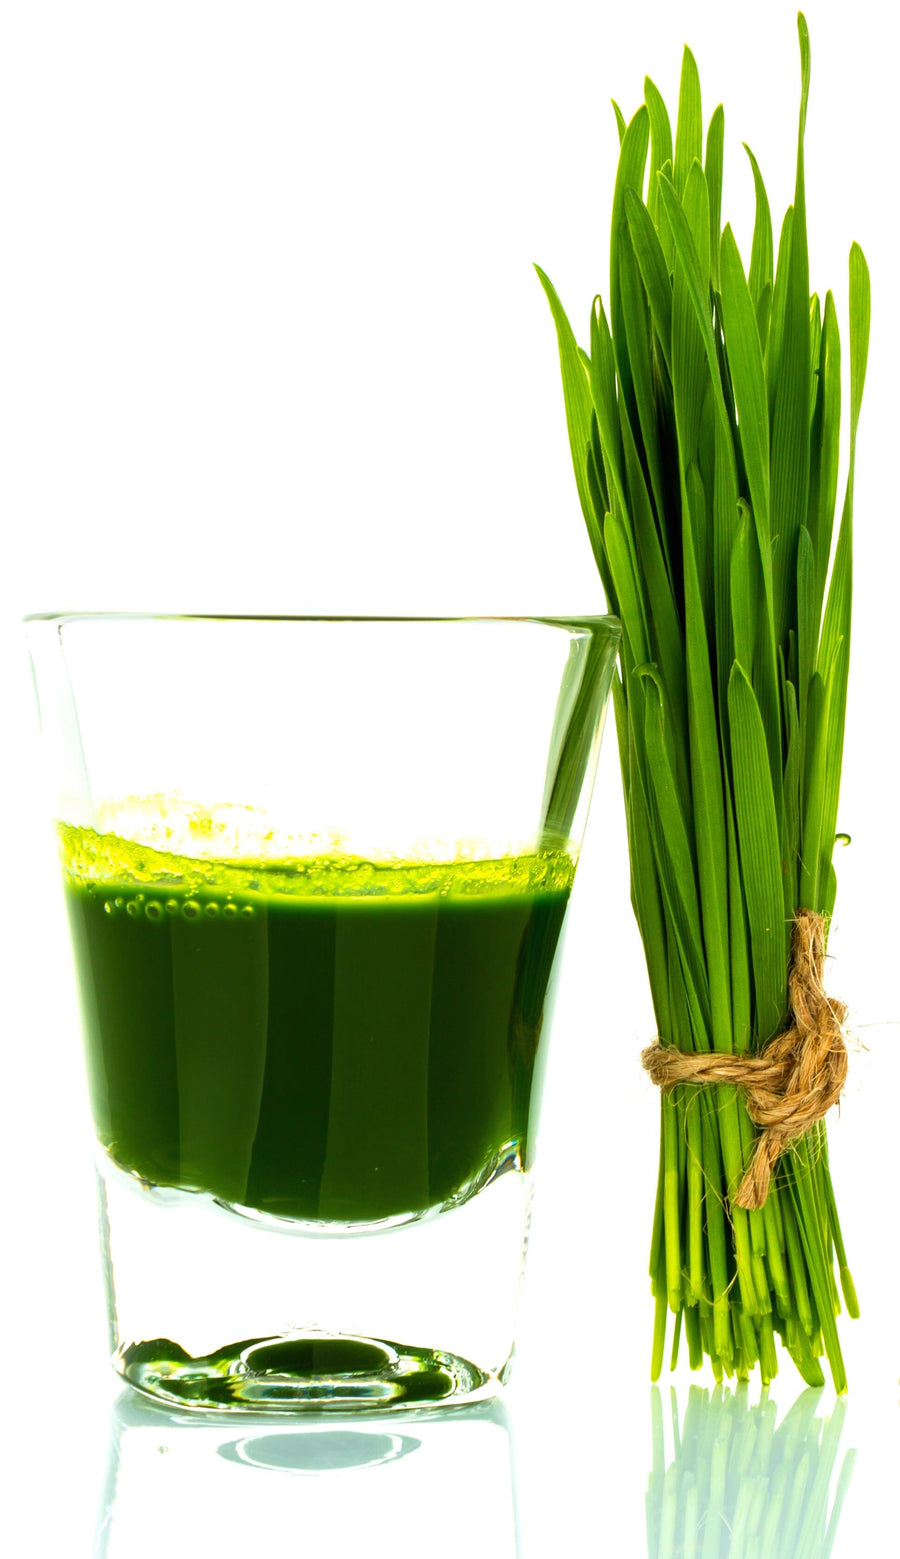 Image of Wheatgrass Juice Powder in a shot glass